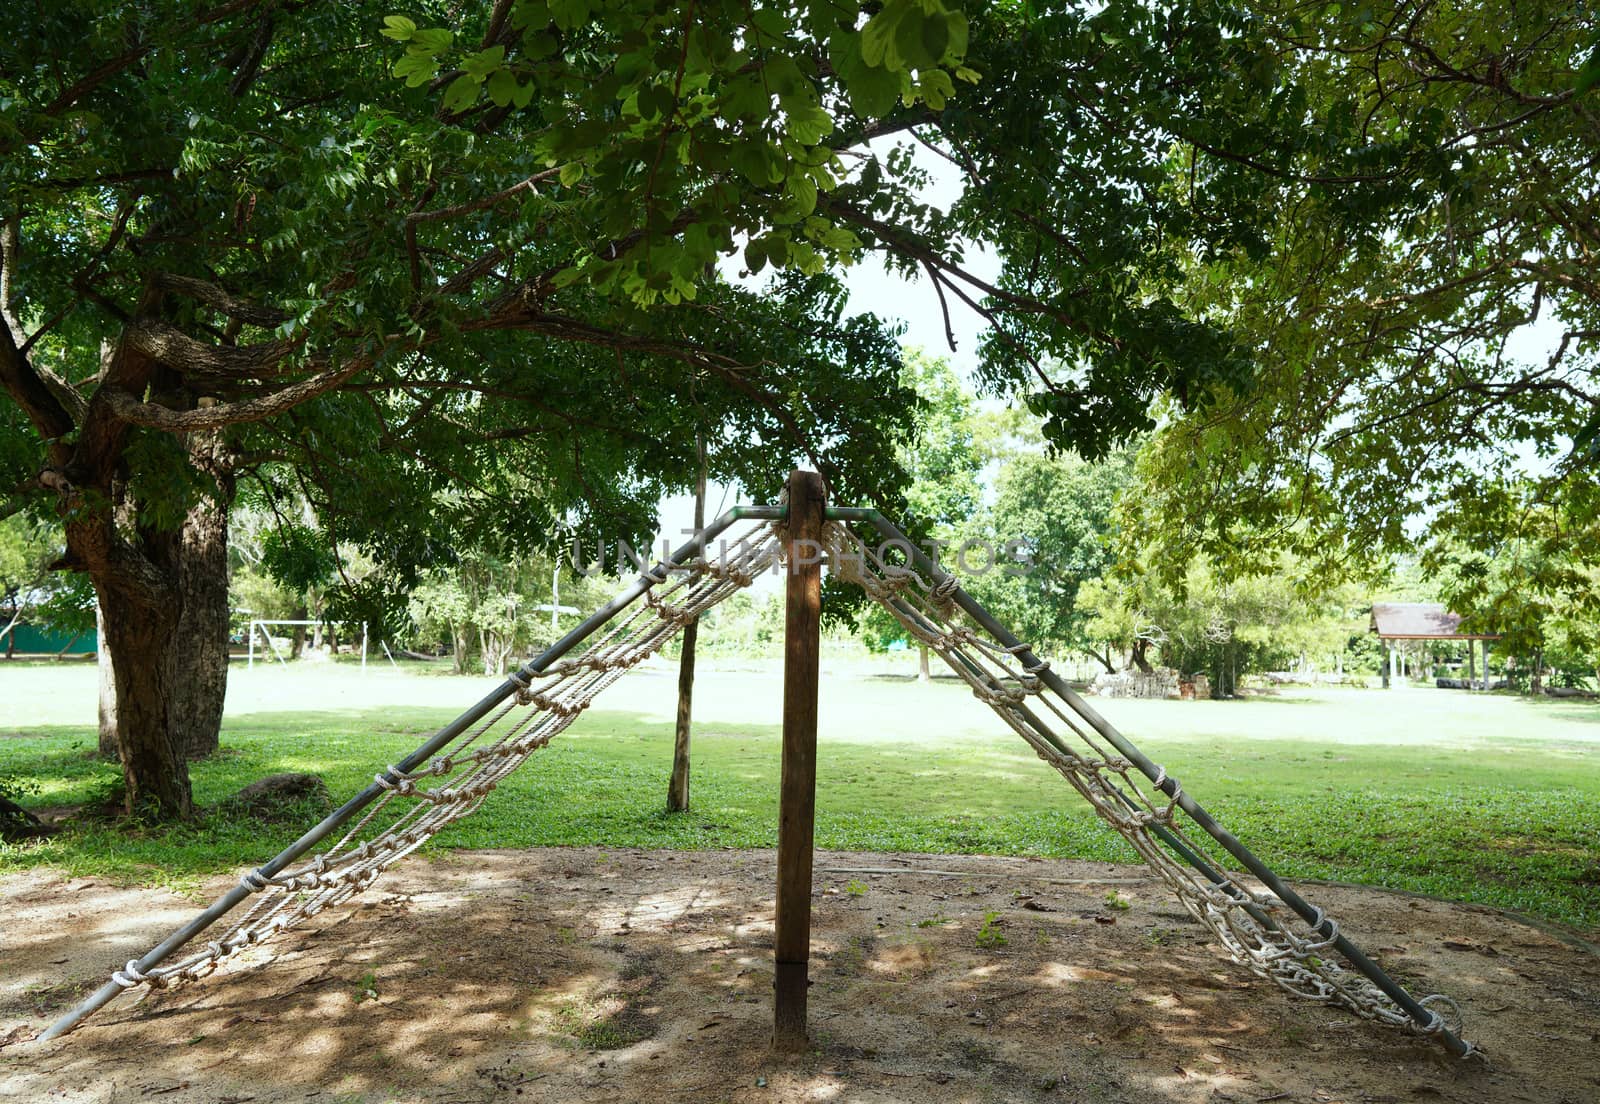 The test post of the military camp tied with a rope.